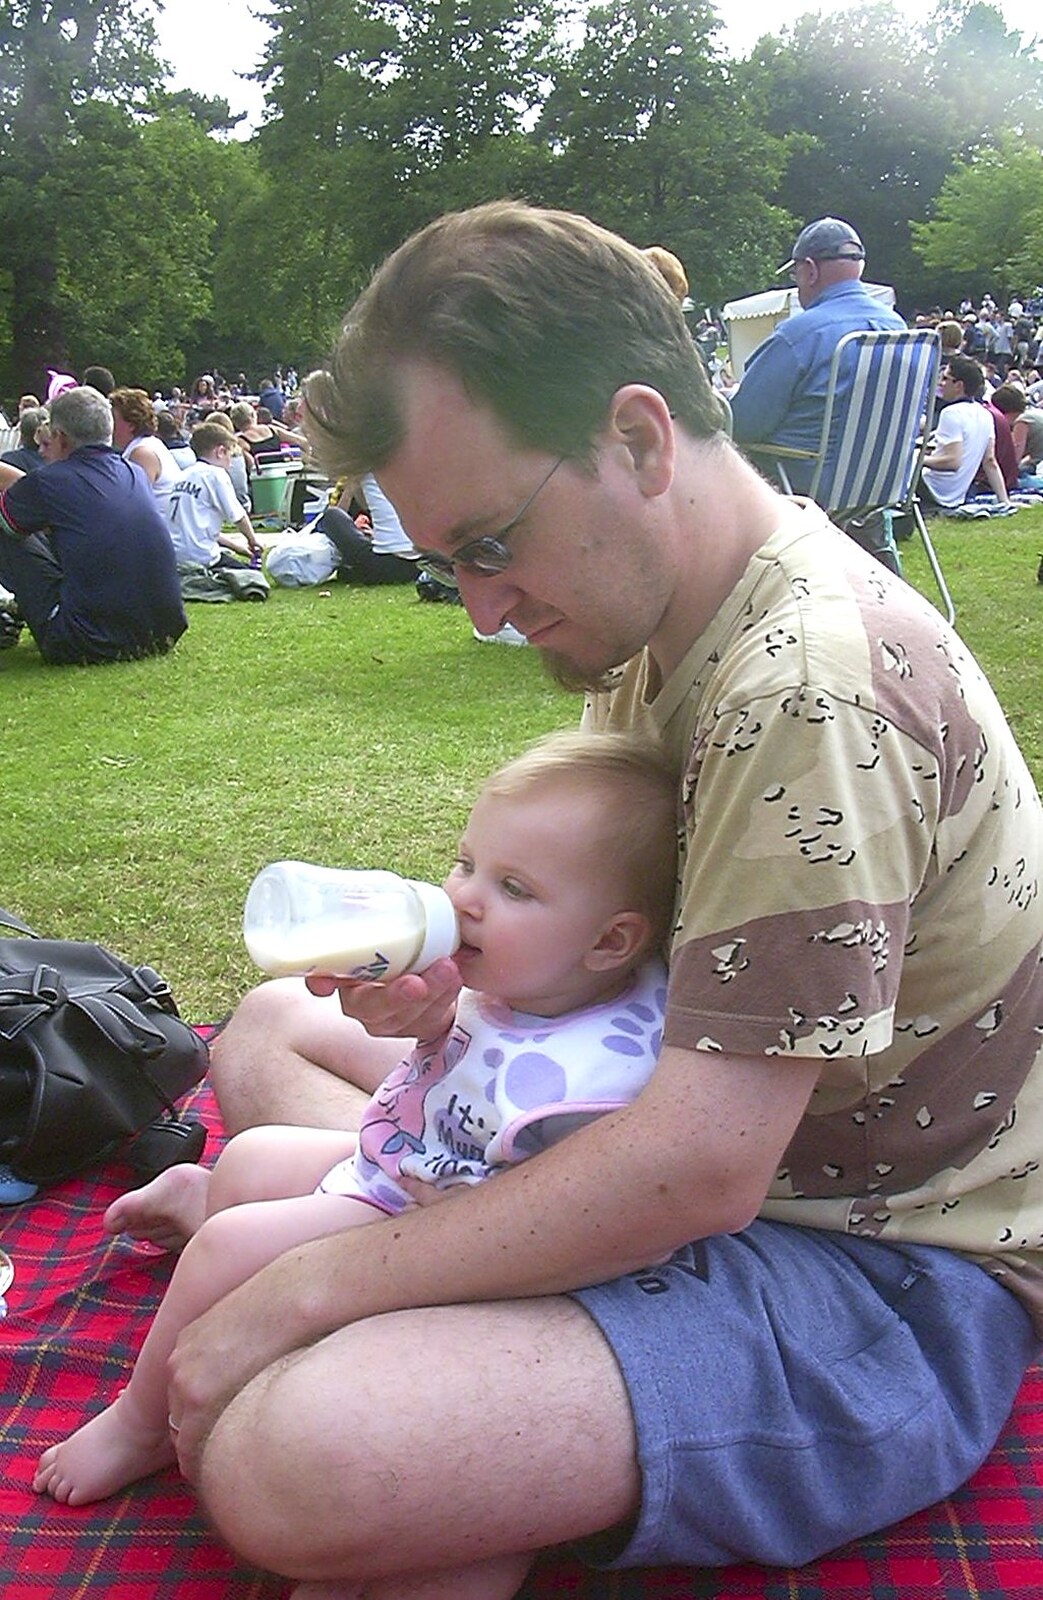 Ipswich Music Day and the BSCC in Cotton, Suffolk - 6th July 2003: Phil-sprog has some milk